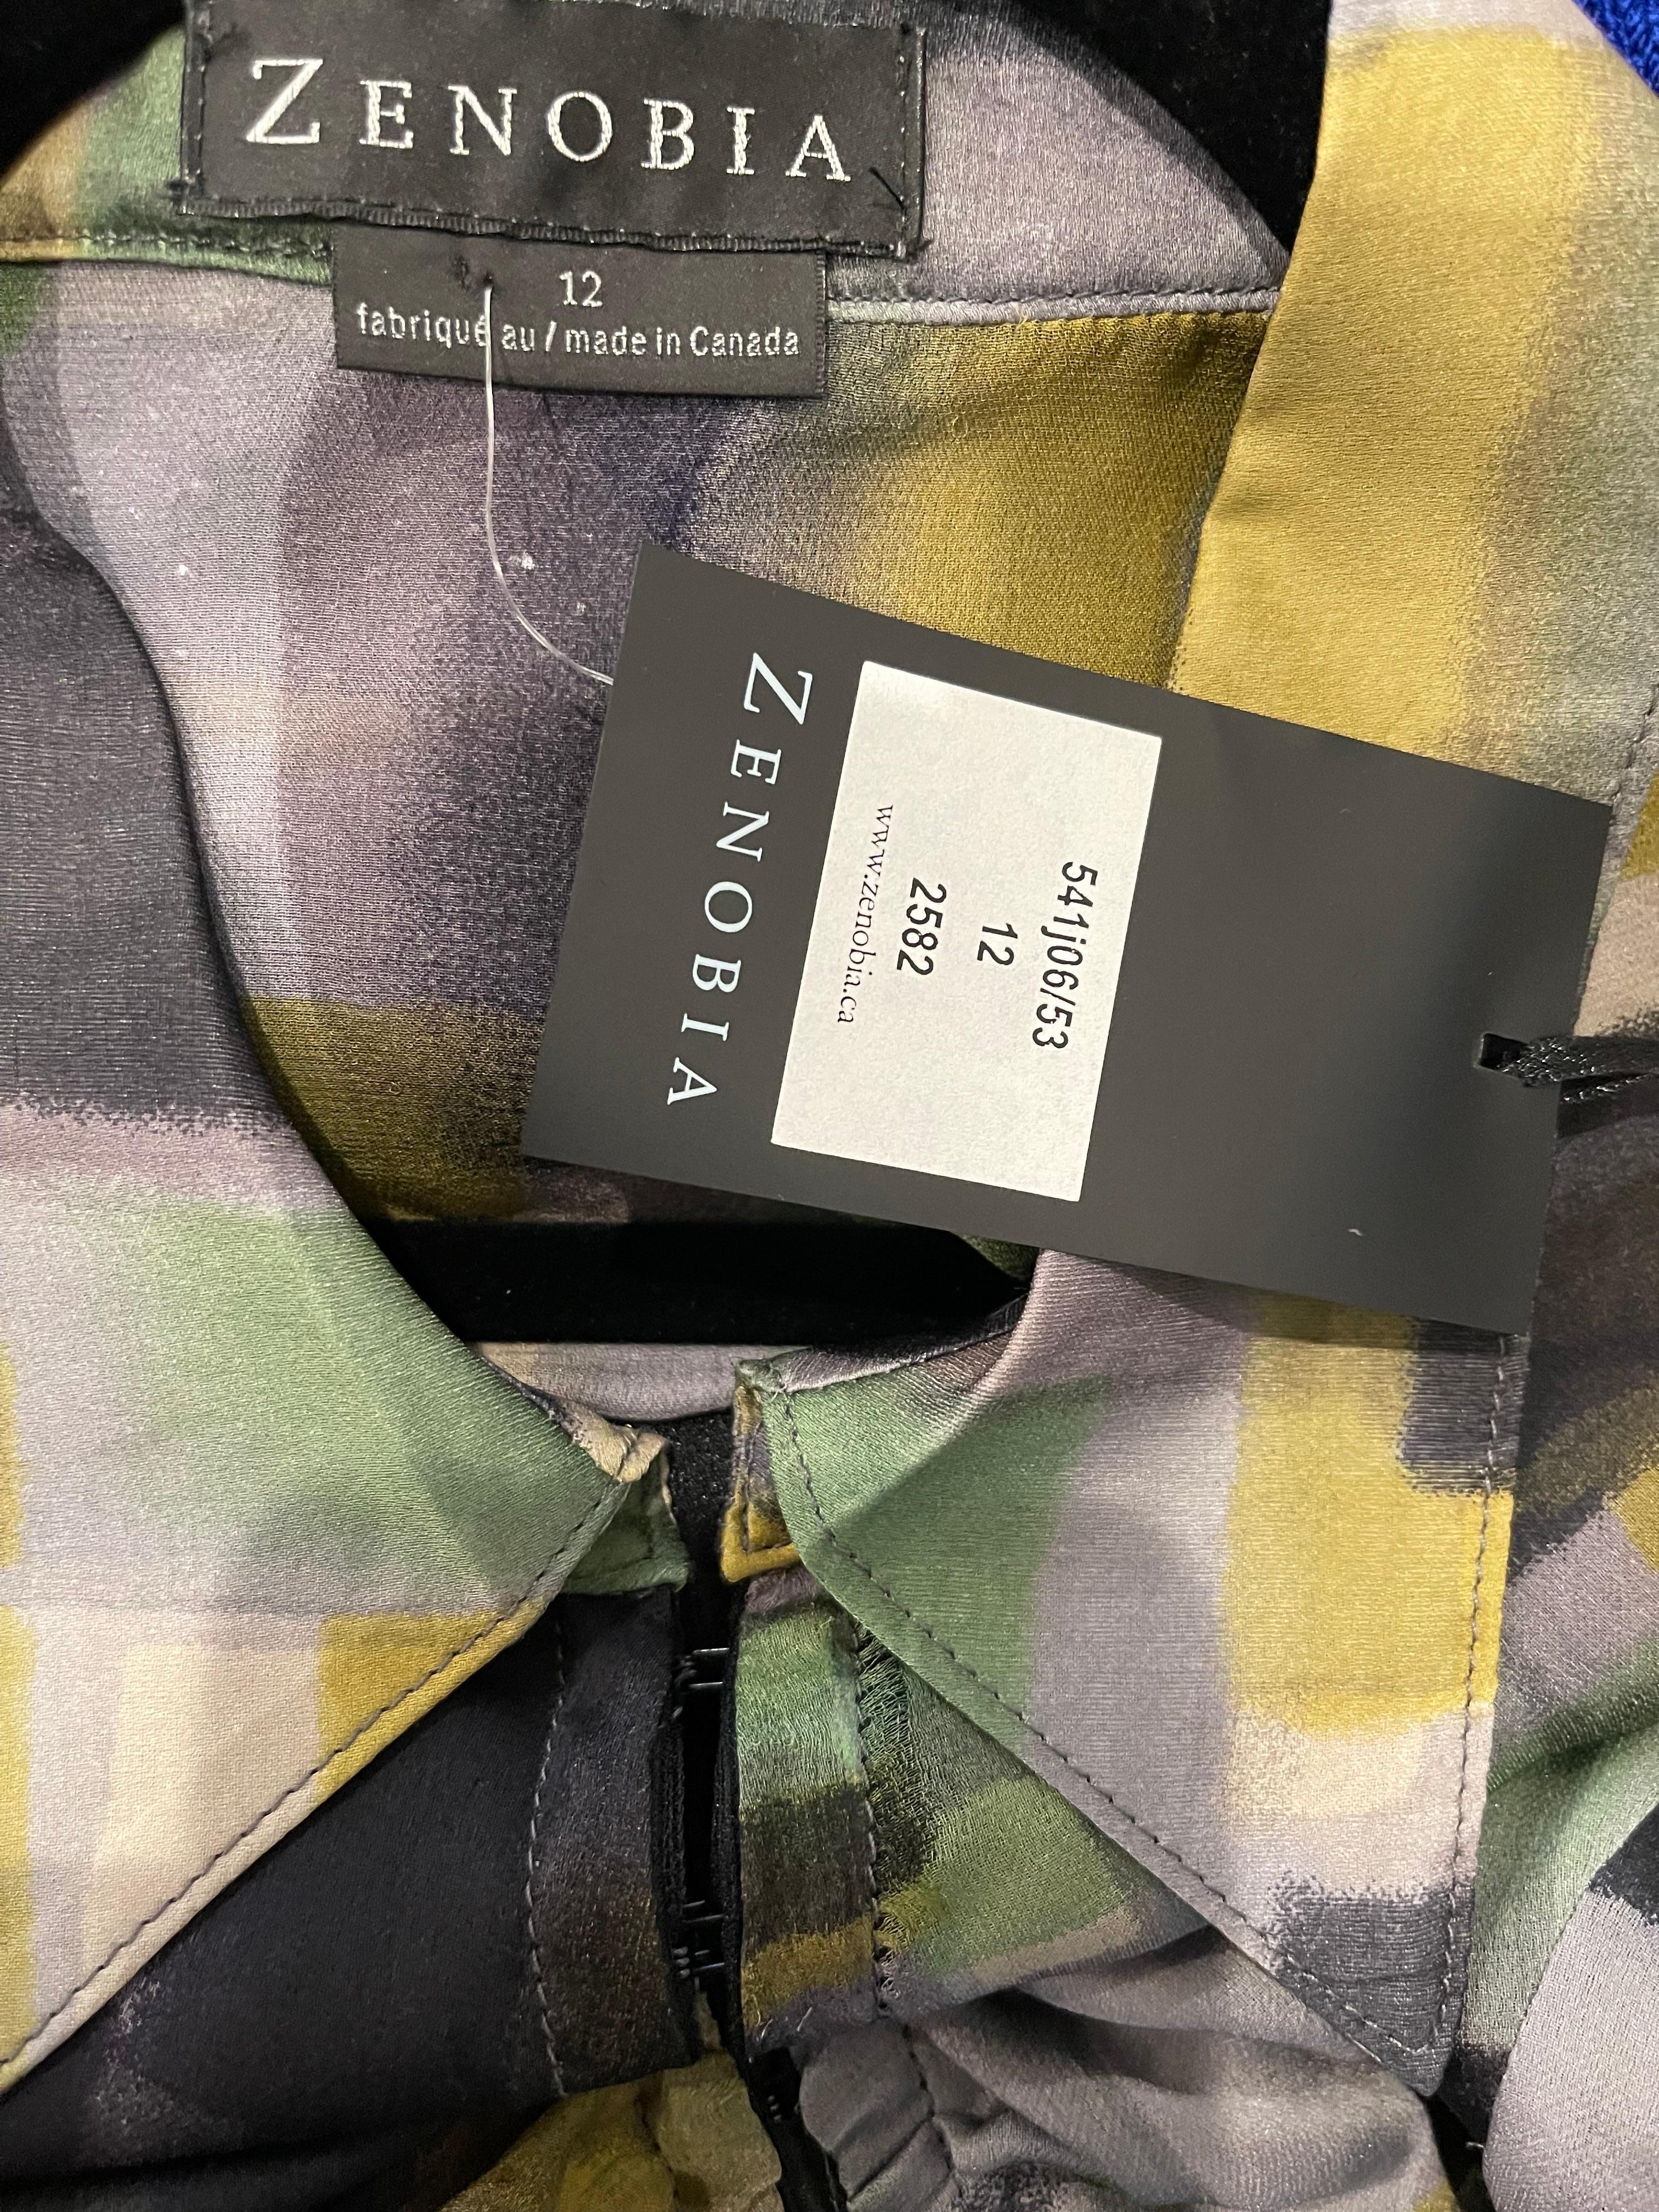 Beautiful brand new early 2000s Y2K ZENOBIA silk chiffon sheer blouse ! Vibrant colors of green, yellow, gray, black and white. Hook-and-eye closures up the entire front, and at each sleeve cuff. Flattering ruching details on the front. Great